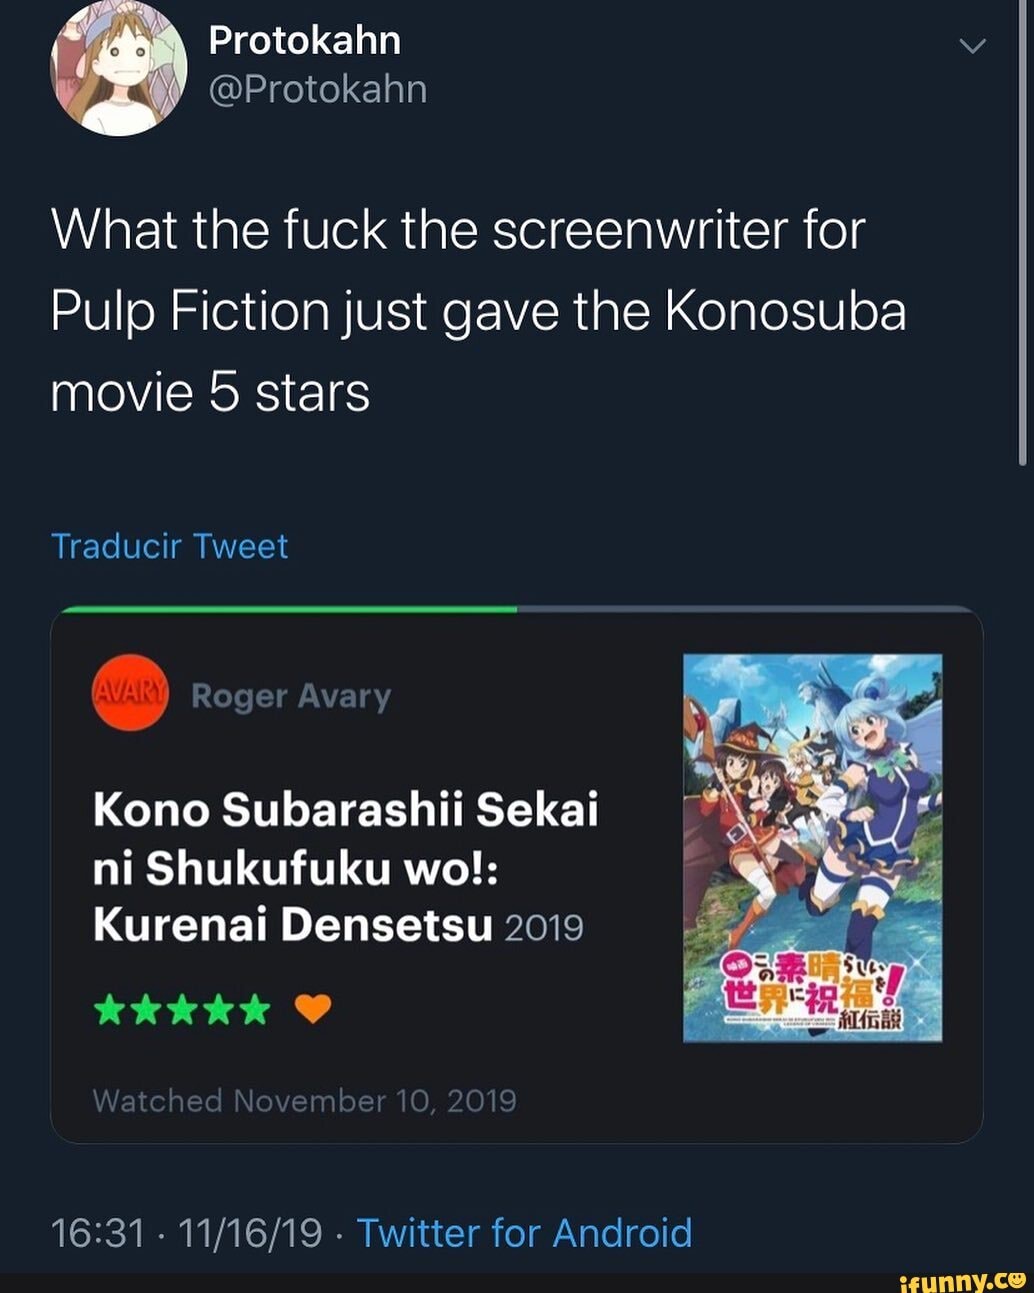 Screenwriter of Pulp Fiction Rates the KonoSuba Movie Higher Than The  Godfather